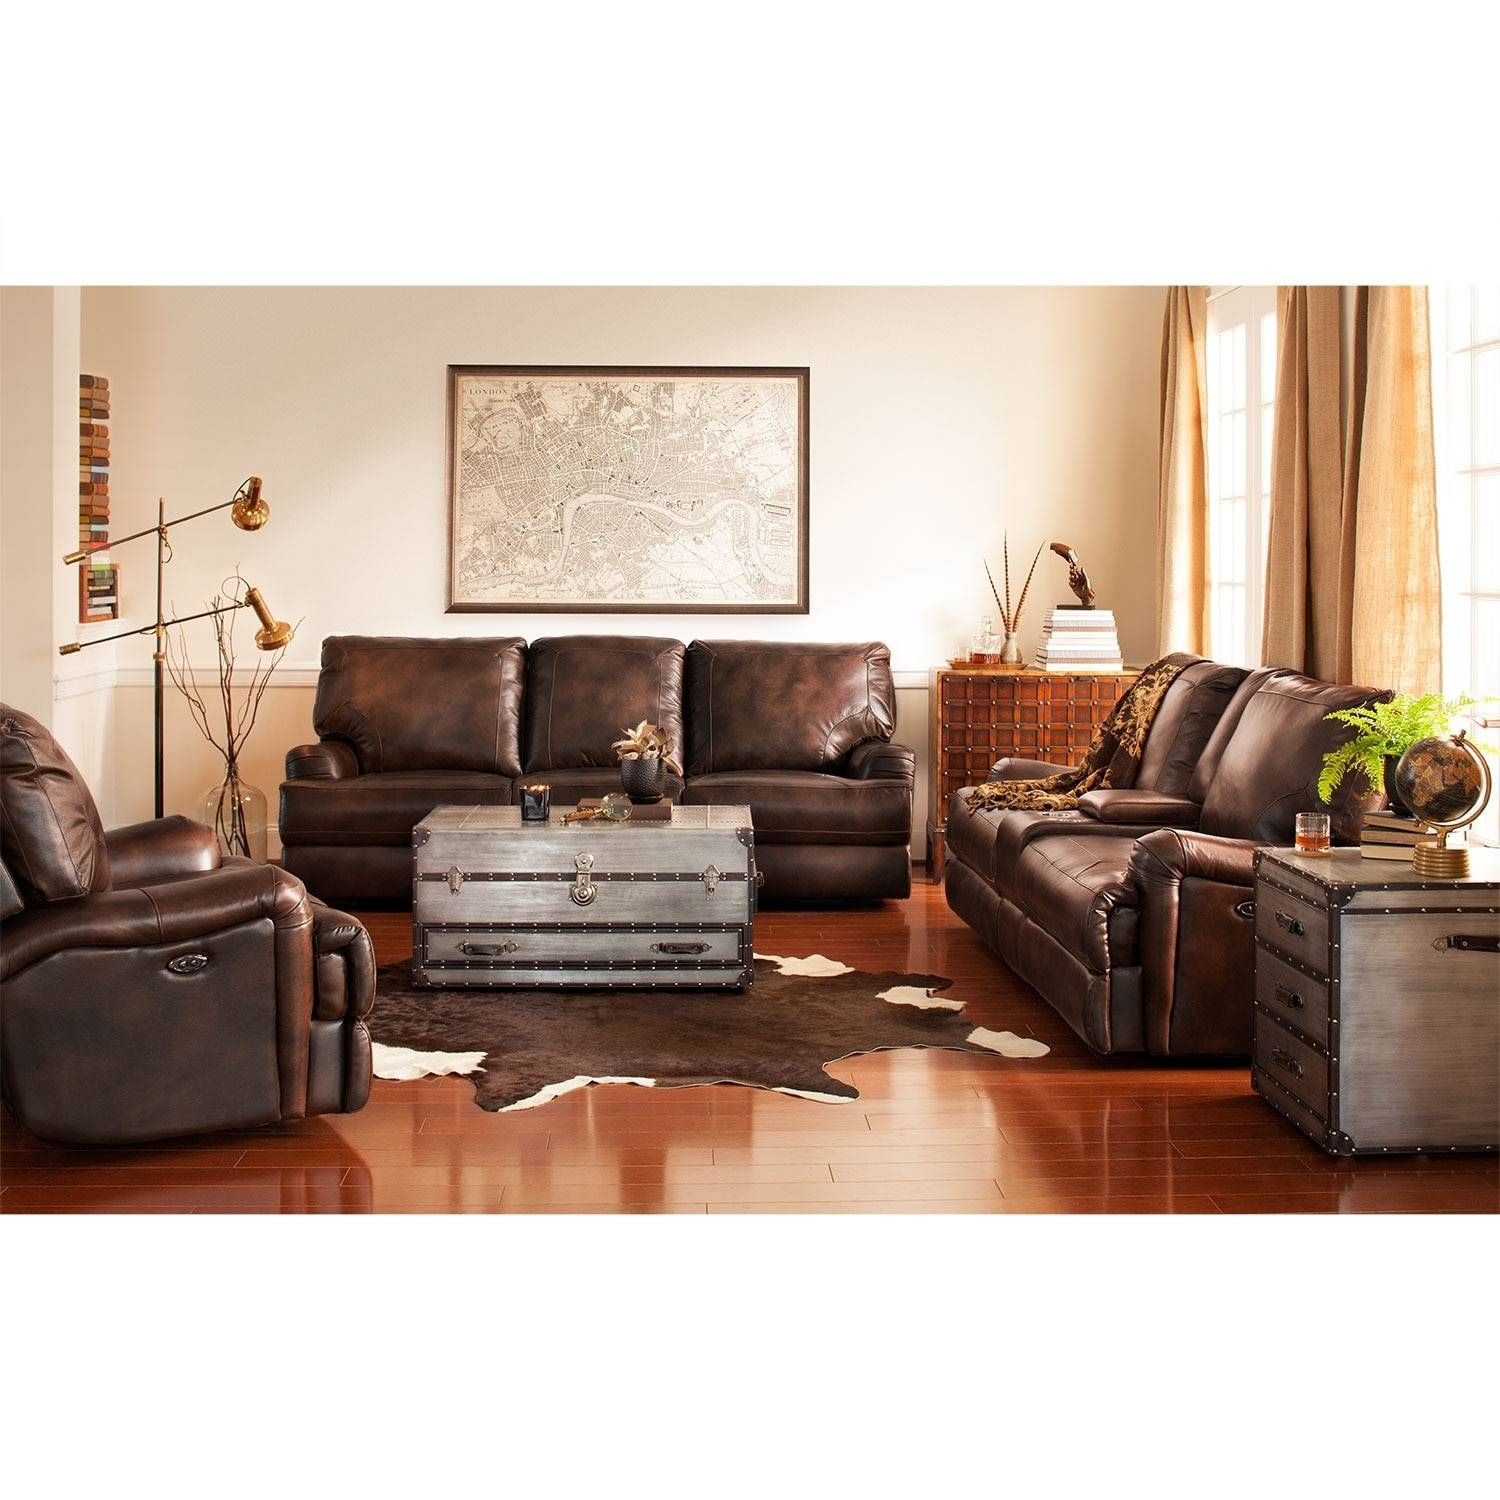 Kingsway Power Reclining Sofa, Loveseat And Recliner Set – Brown For Reclining Sofas And Loveseats Sets (View 11 of 15)